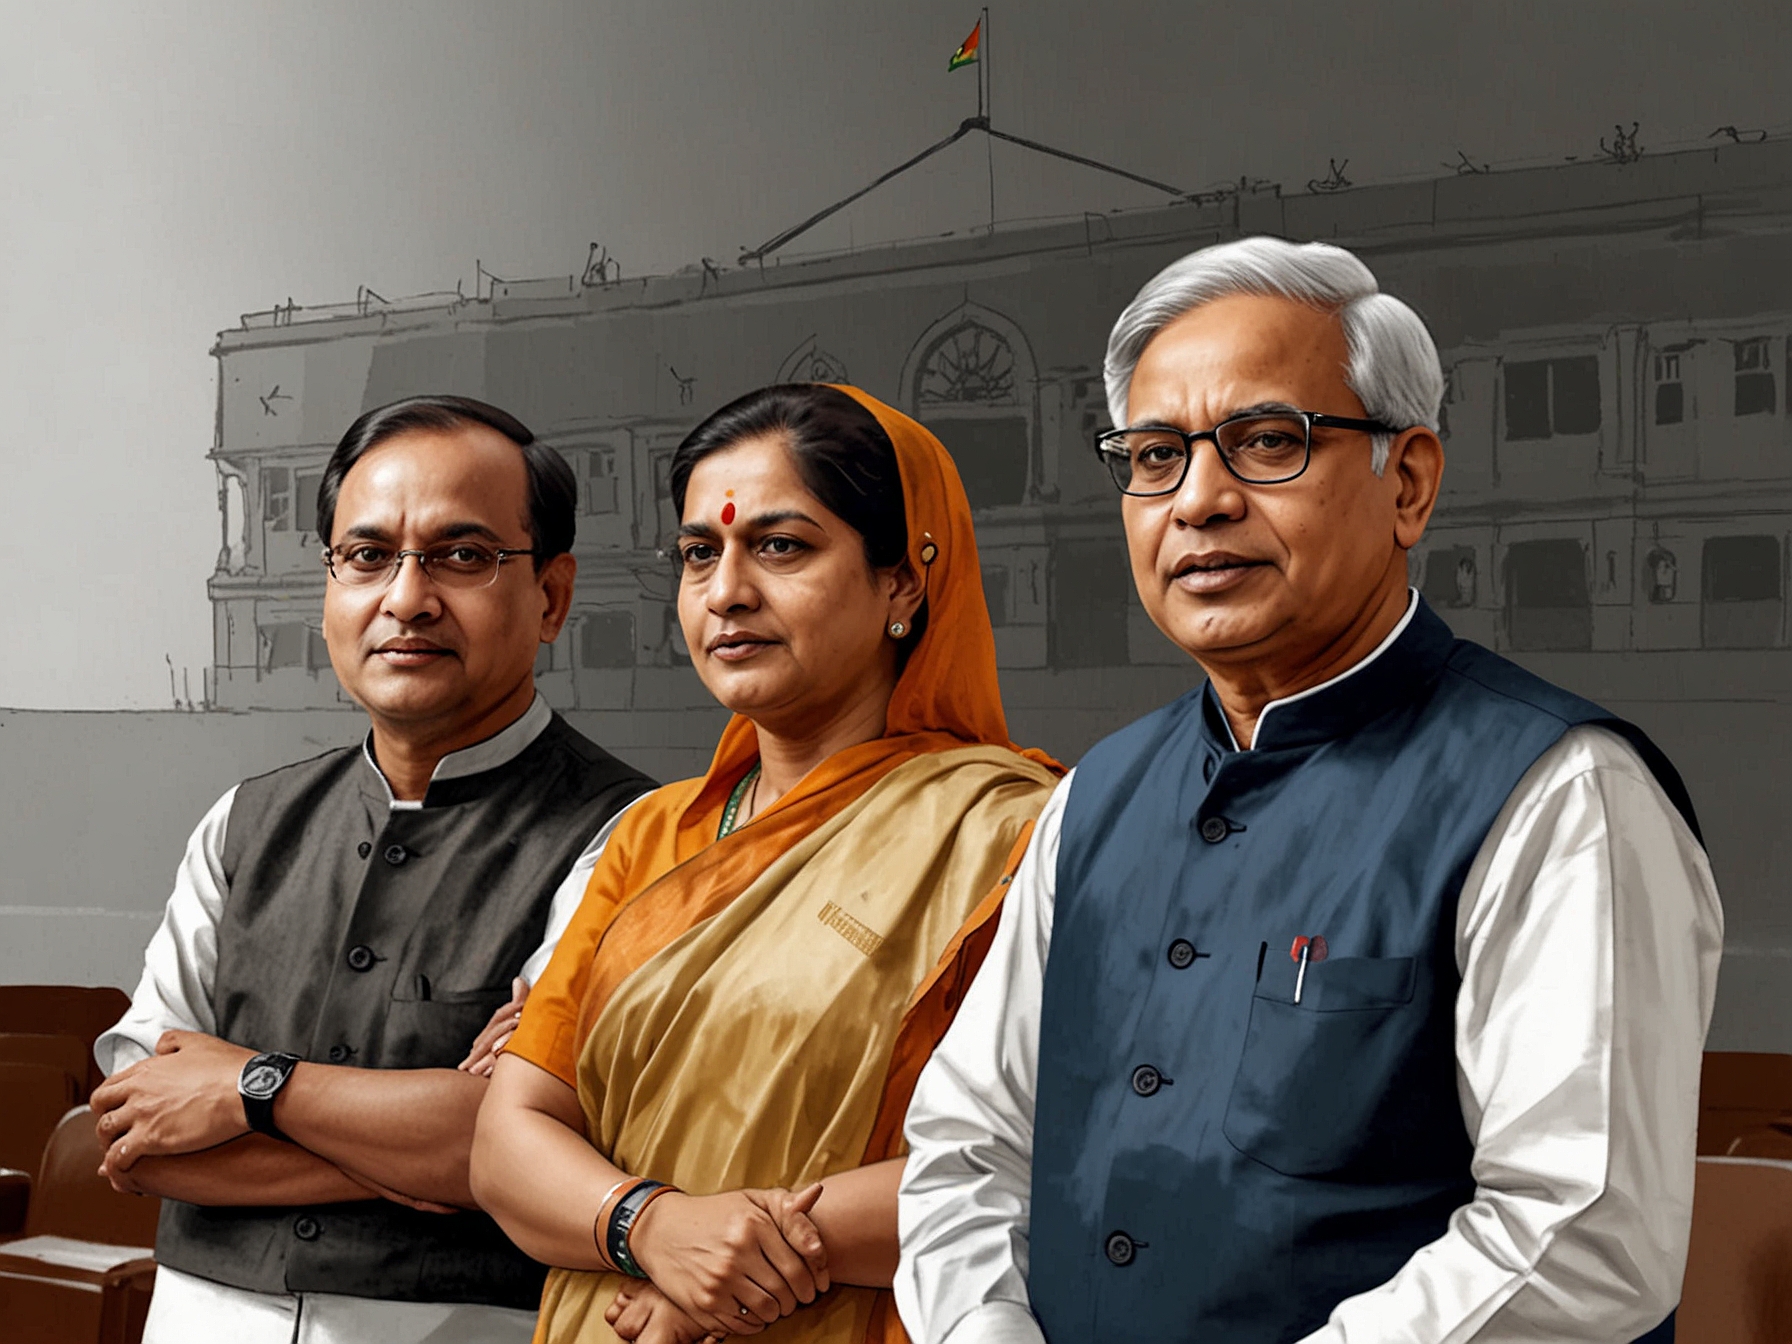 Candidates for the Lok Sabha Speaker election debate in the Parliament, highlighting the political tension and the crucial role coalition support will play in determining the outcome.